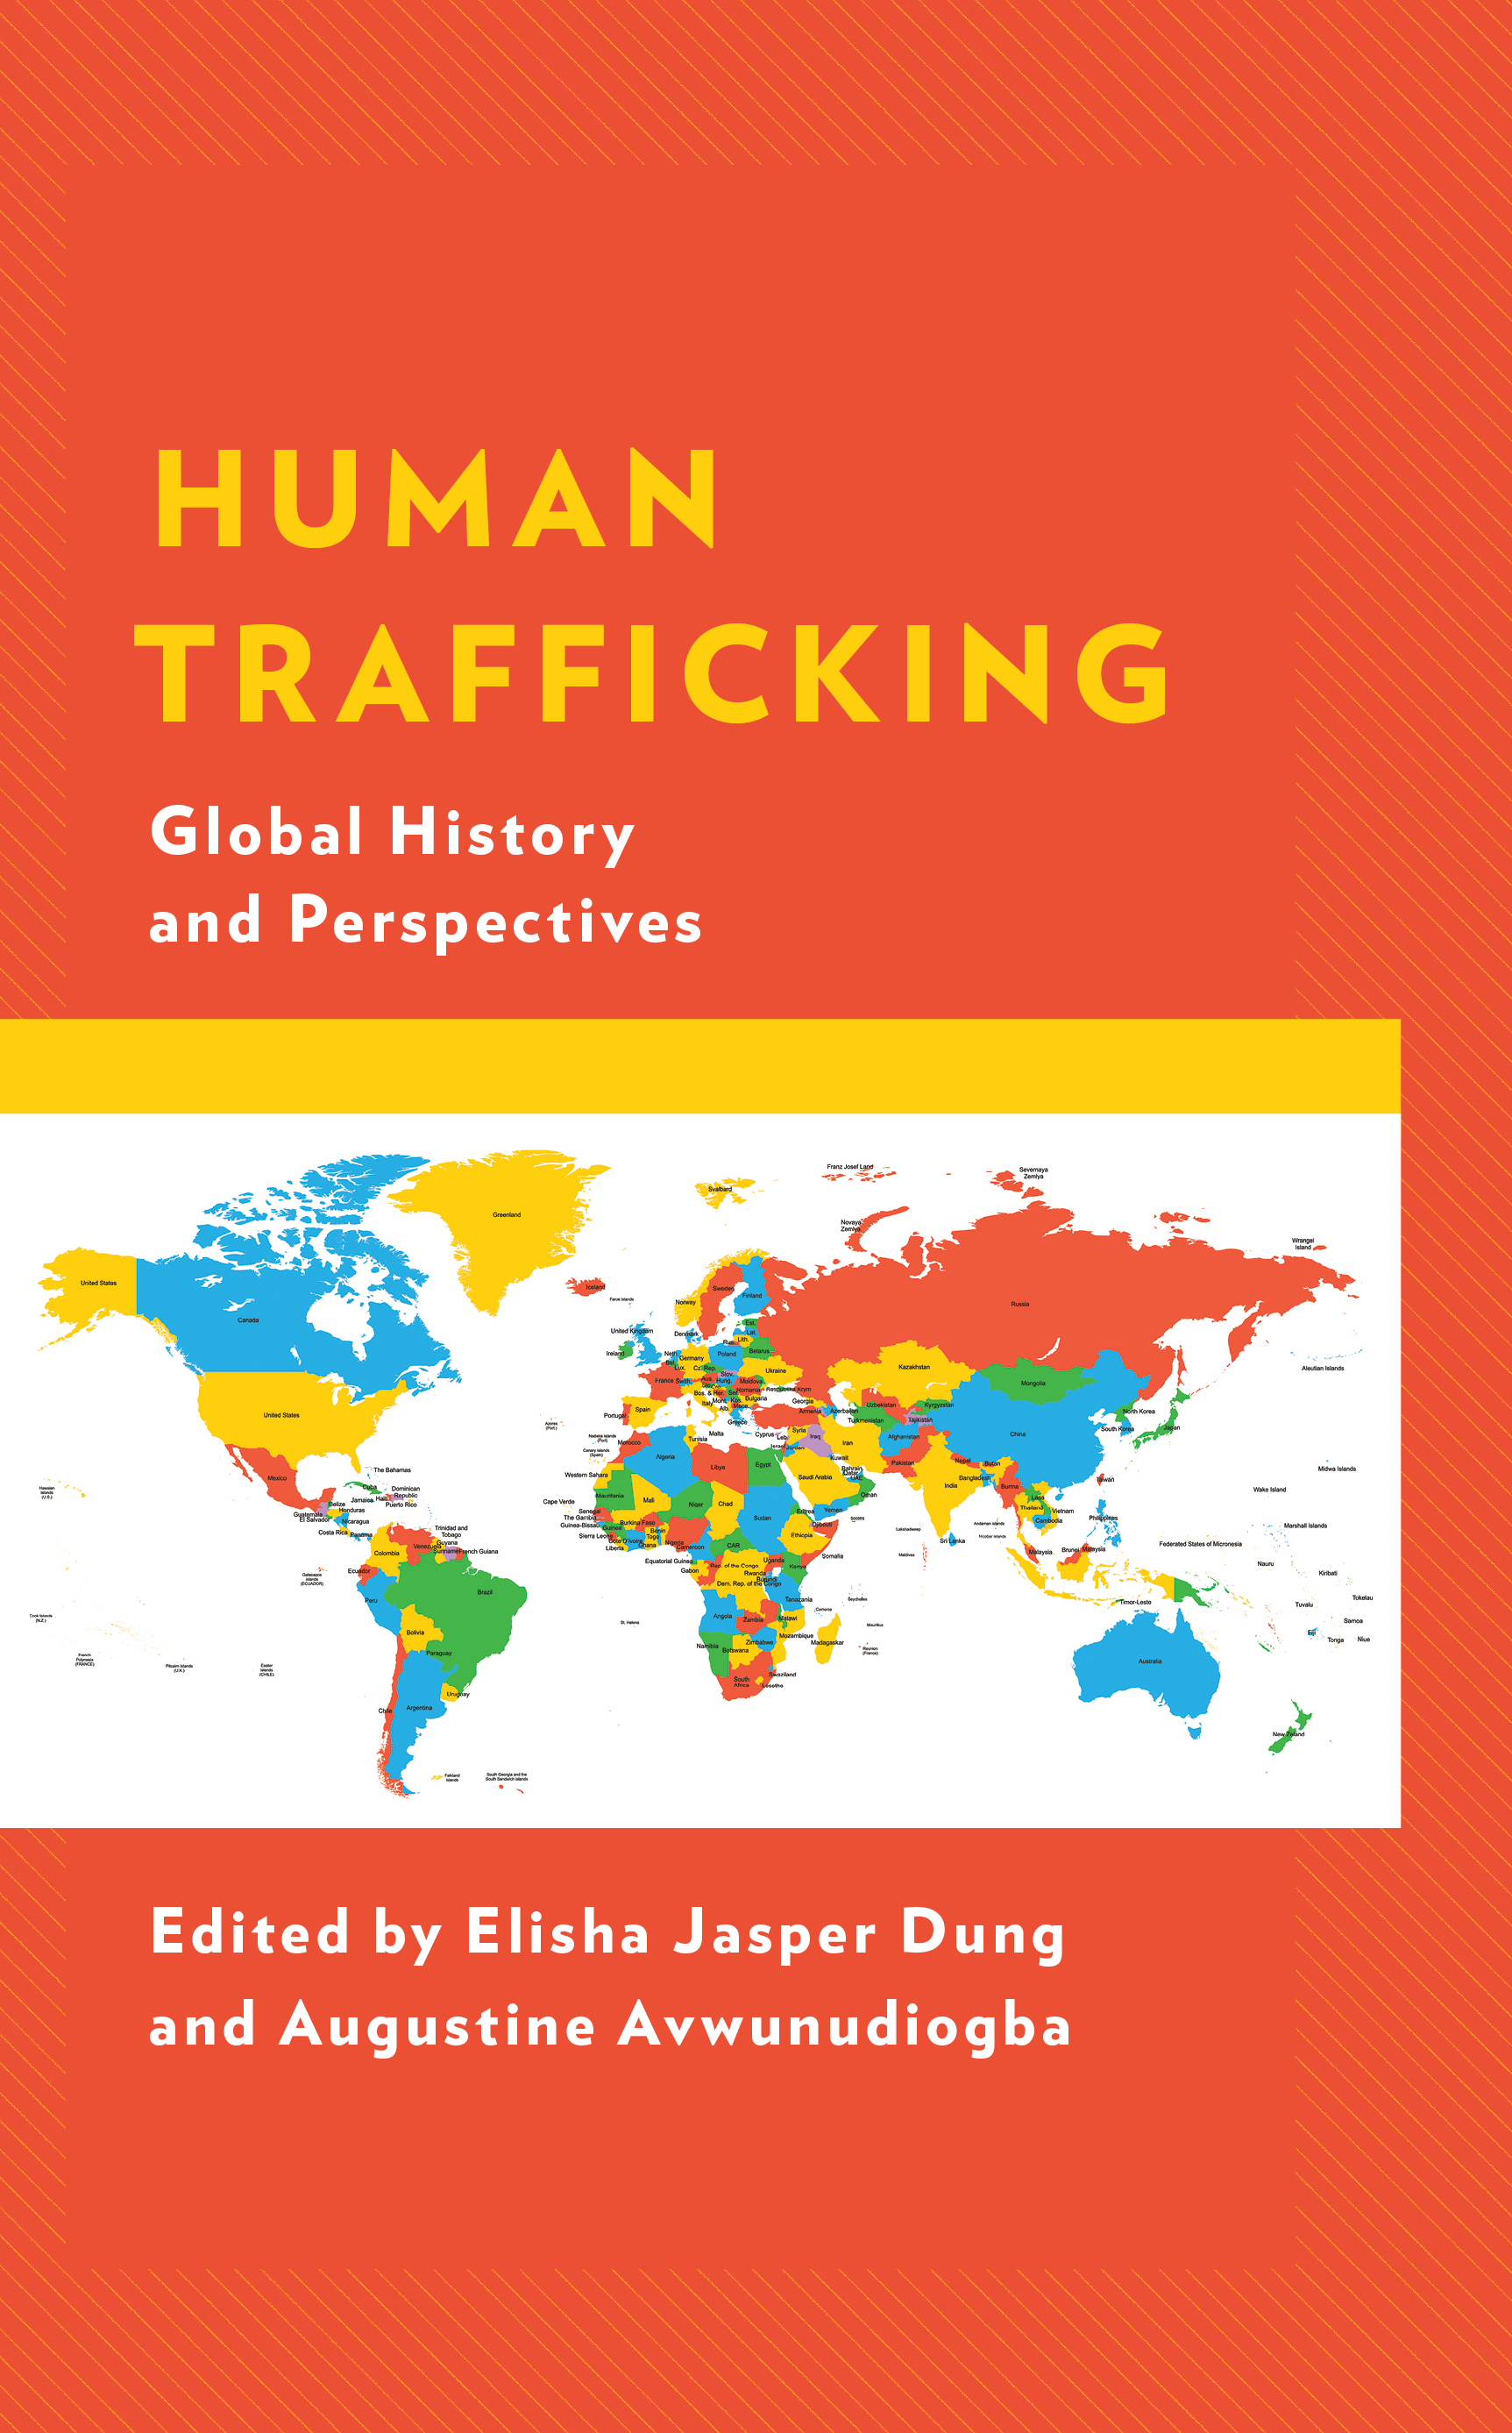 Human Trafficking: Global History and Perspectives